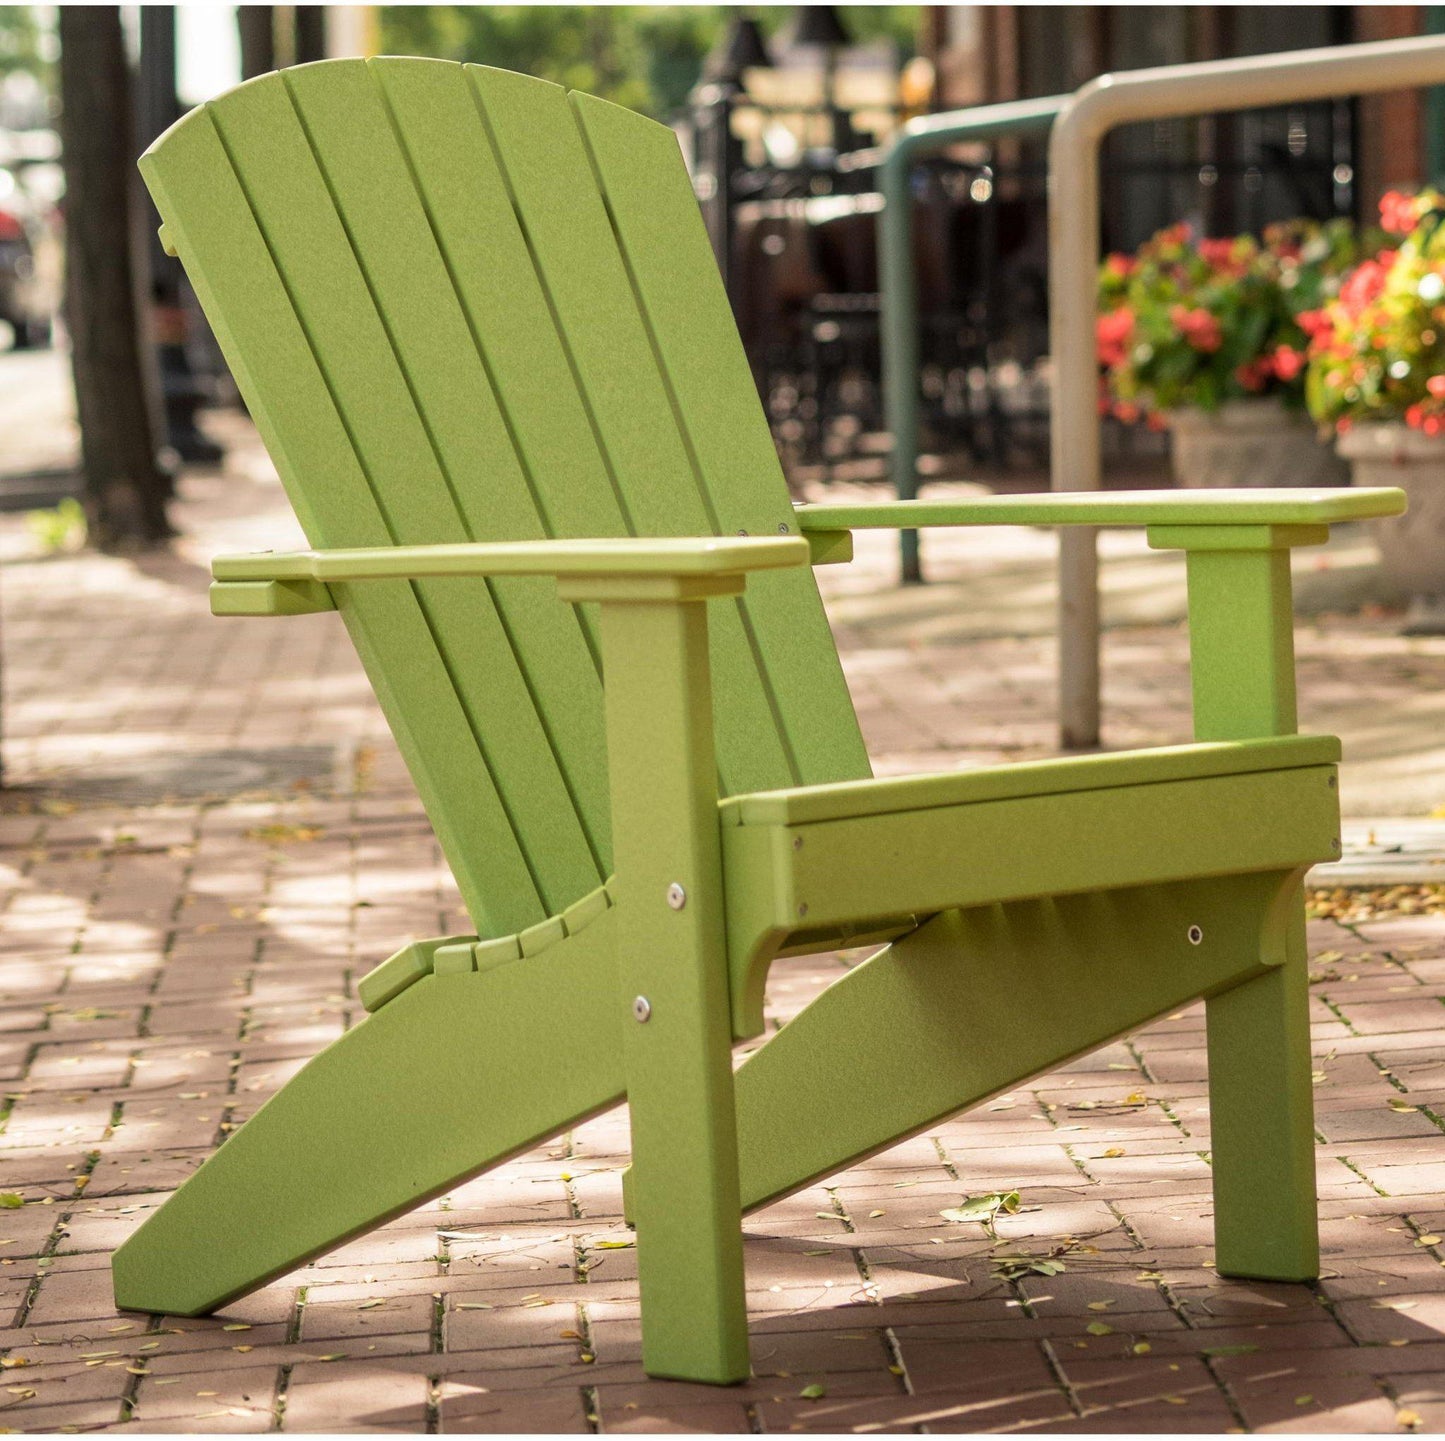 LuxCraft Recycled Plastic Compact Portable Adirondack Chair  - LEAD TIME TO SHIP 10 to 12 BUSINESS DAYS